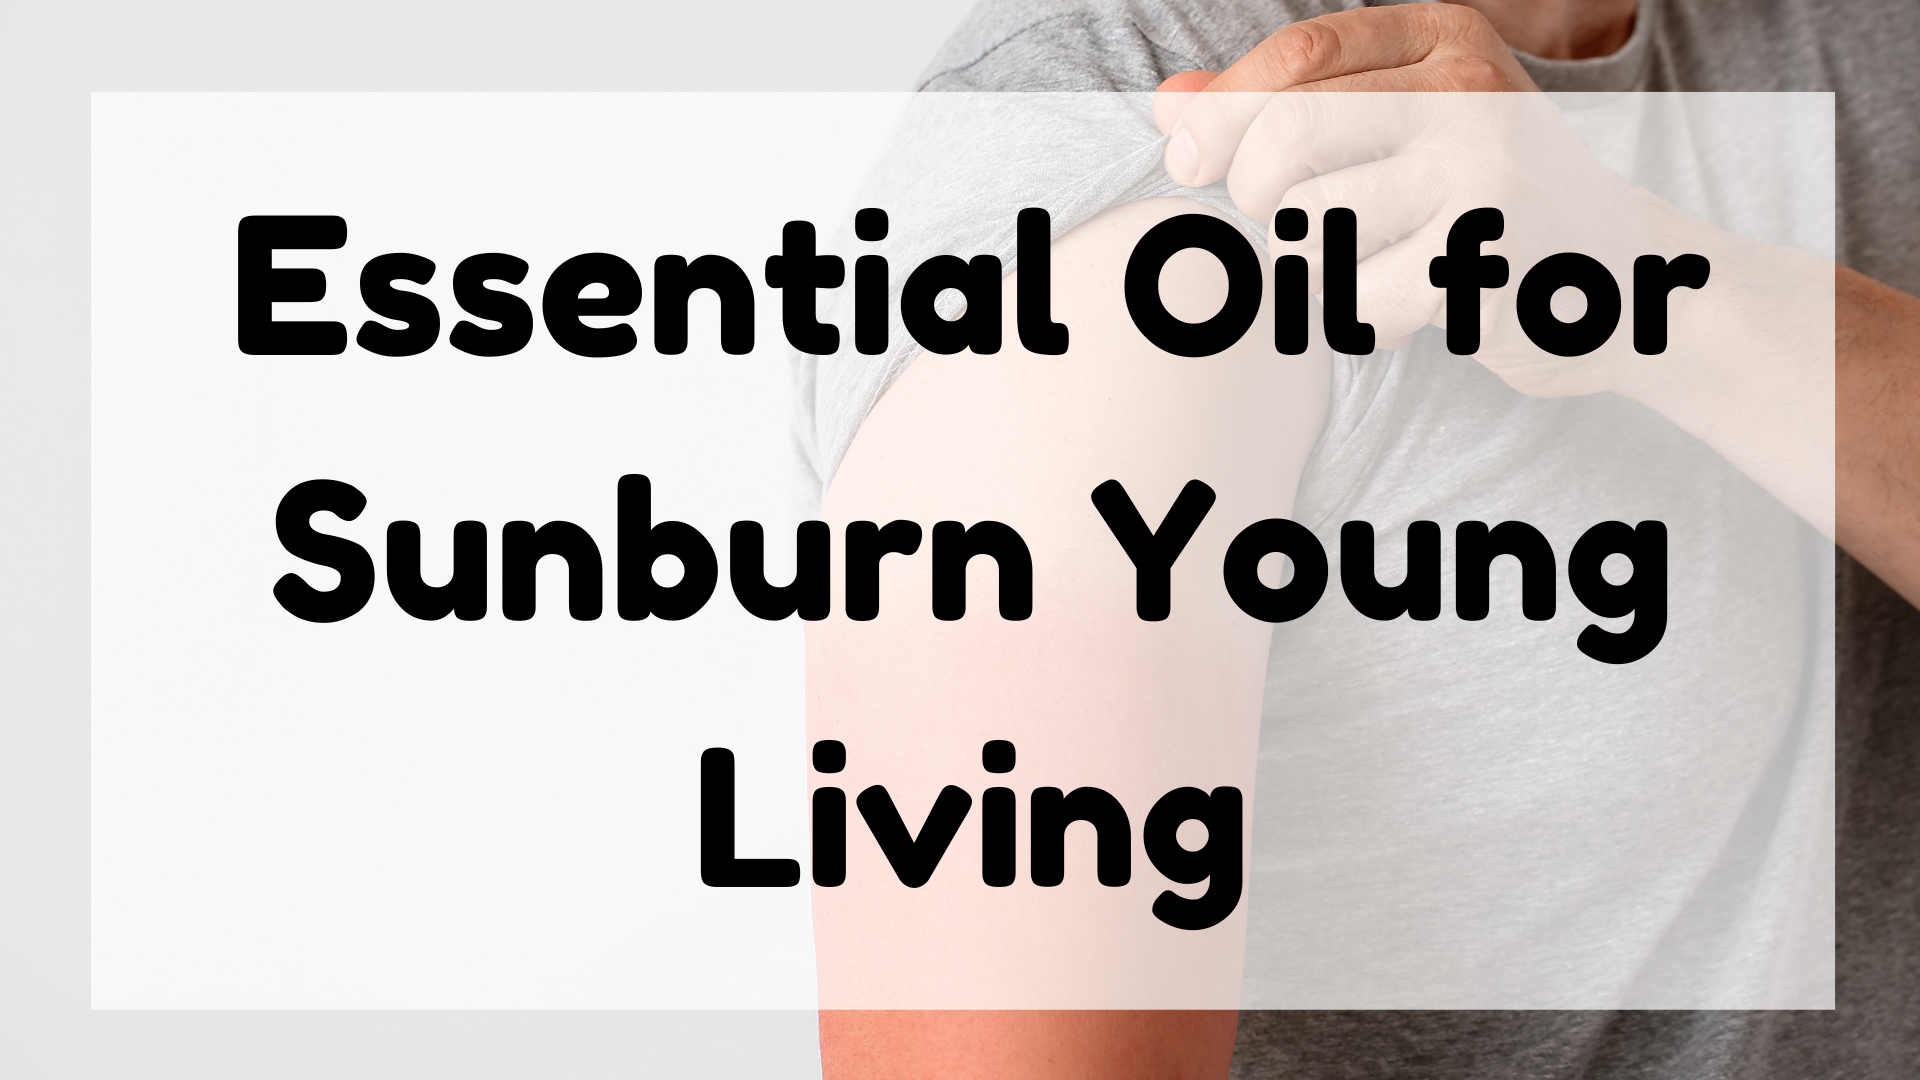 Essential Oil for Sunburn Young Living featured image